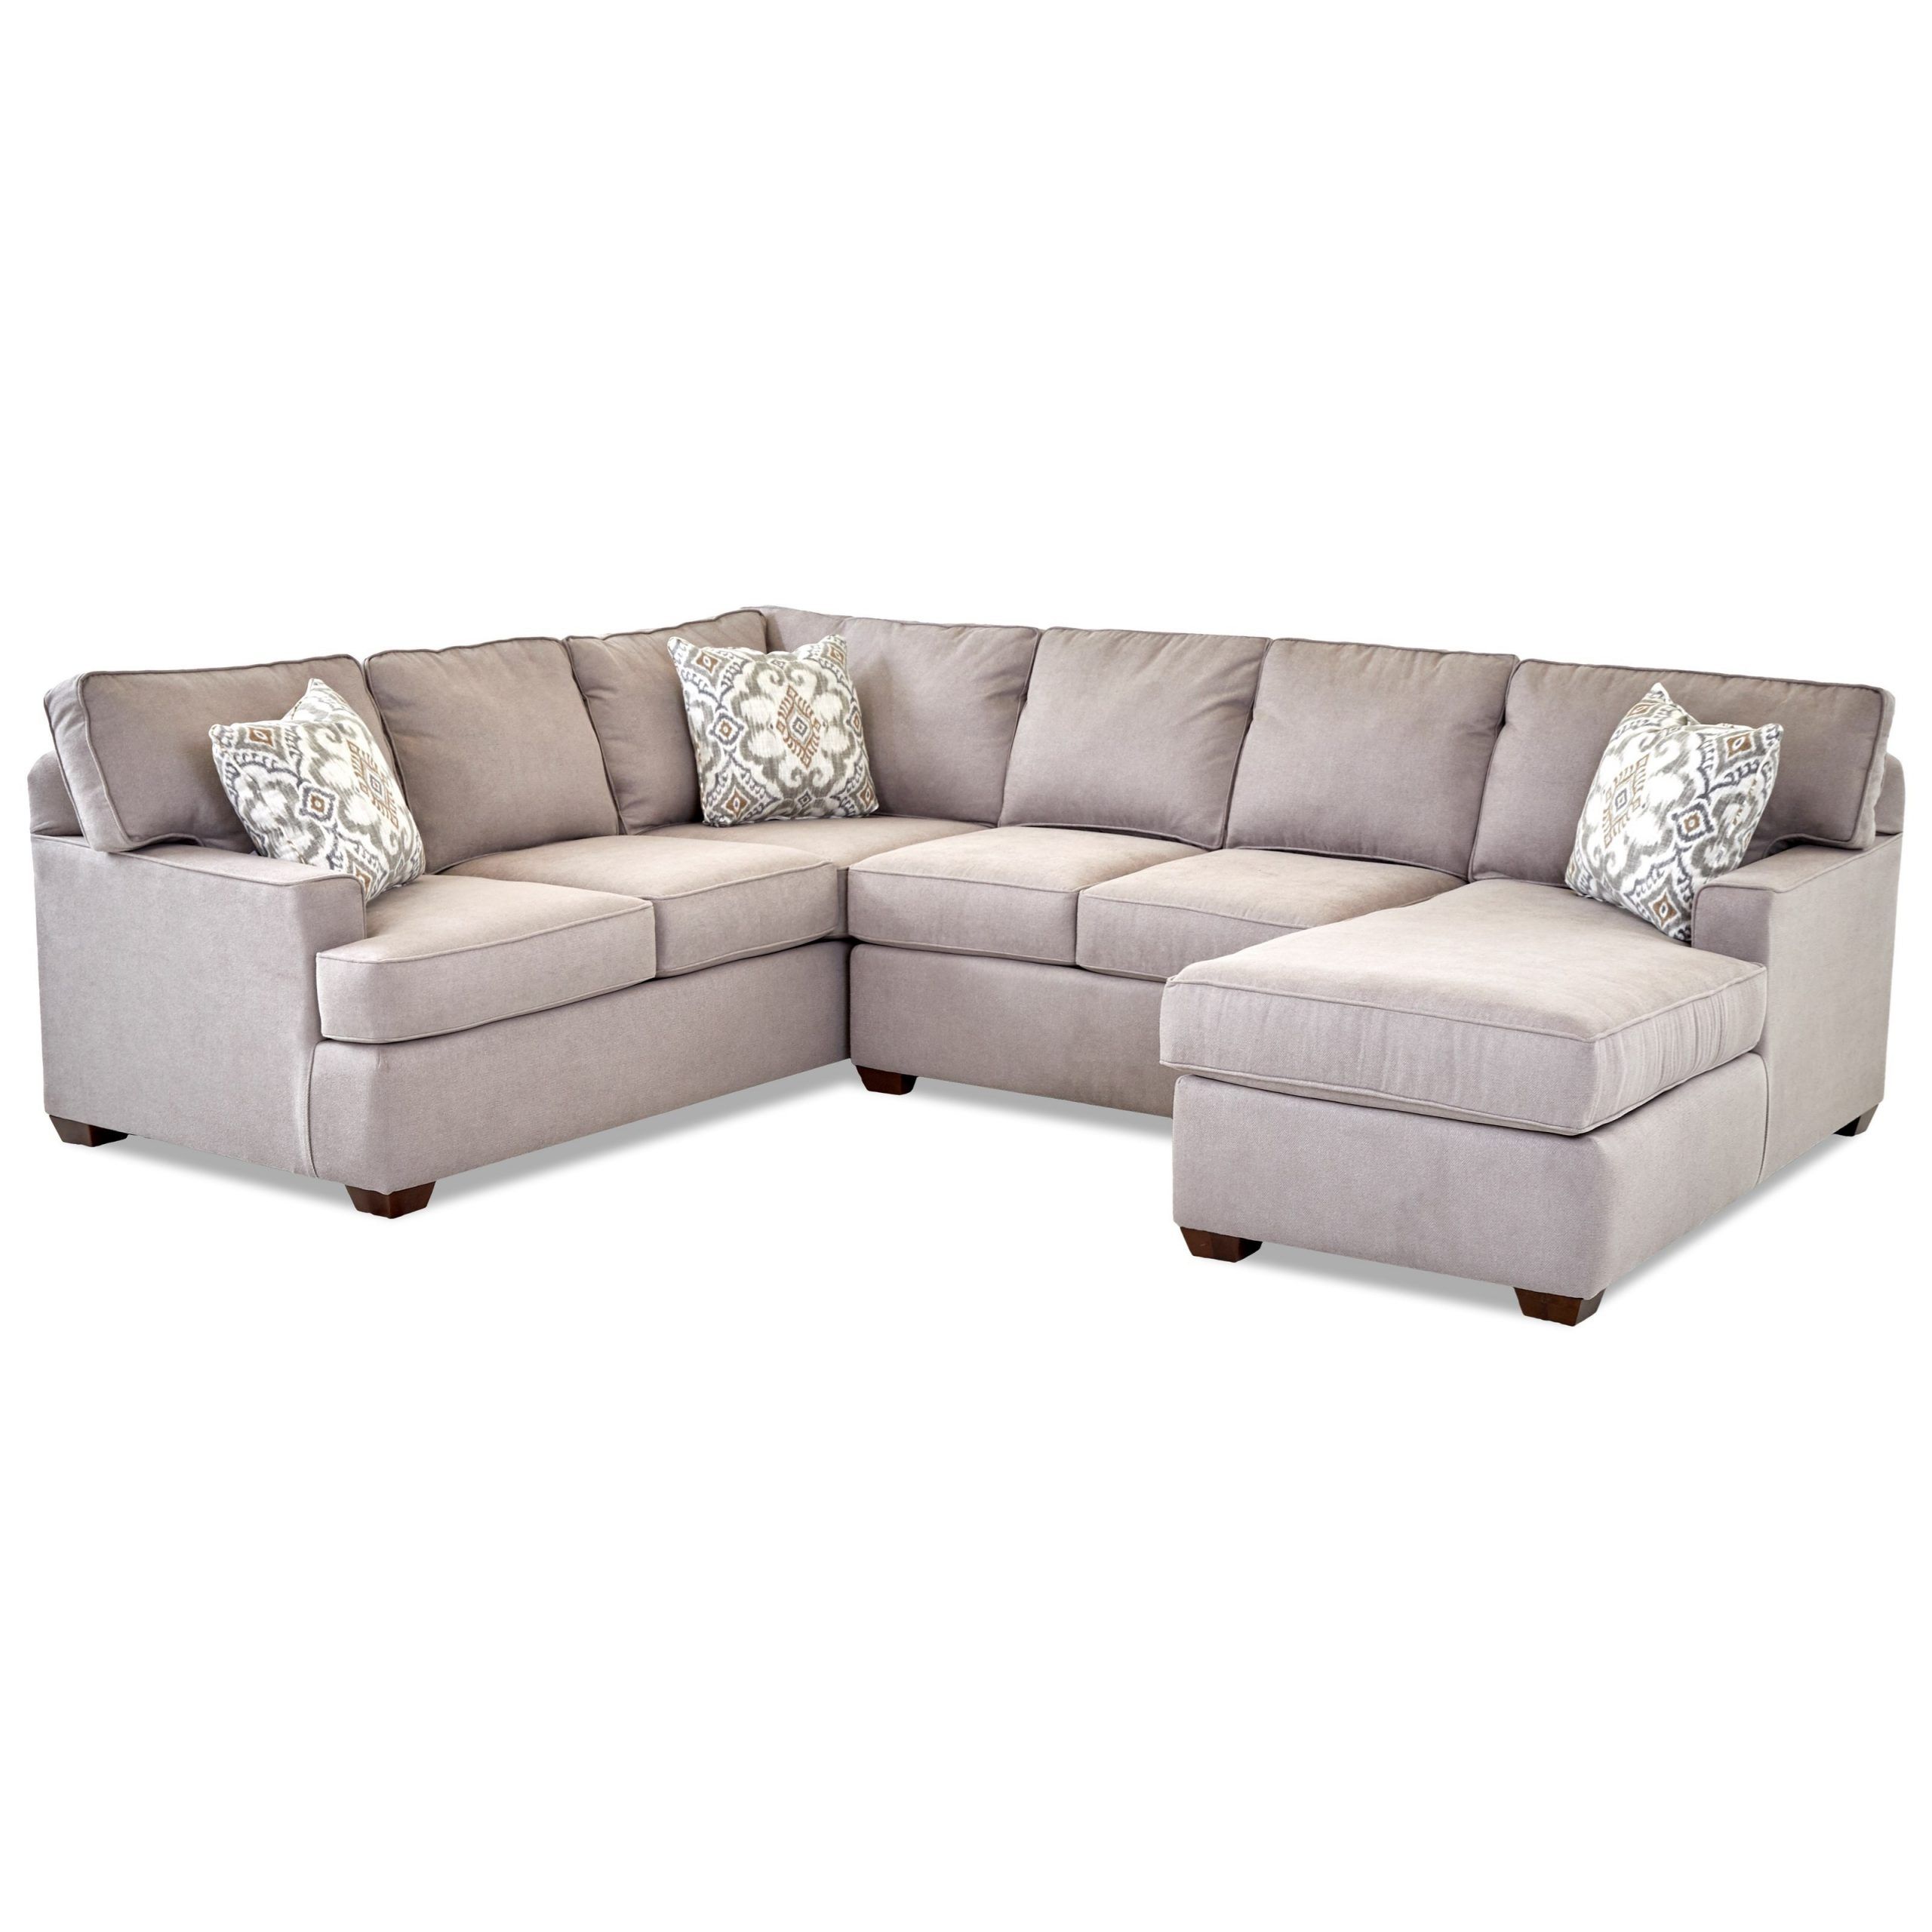 Klaussner Pantego 3 Piece Sectional Sofa With Raf Chaise Pertaining To 3Pc Miles Leather Sectional Sofas With Chaise (View 1 of 15)